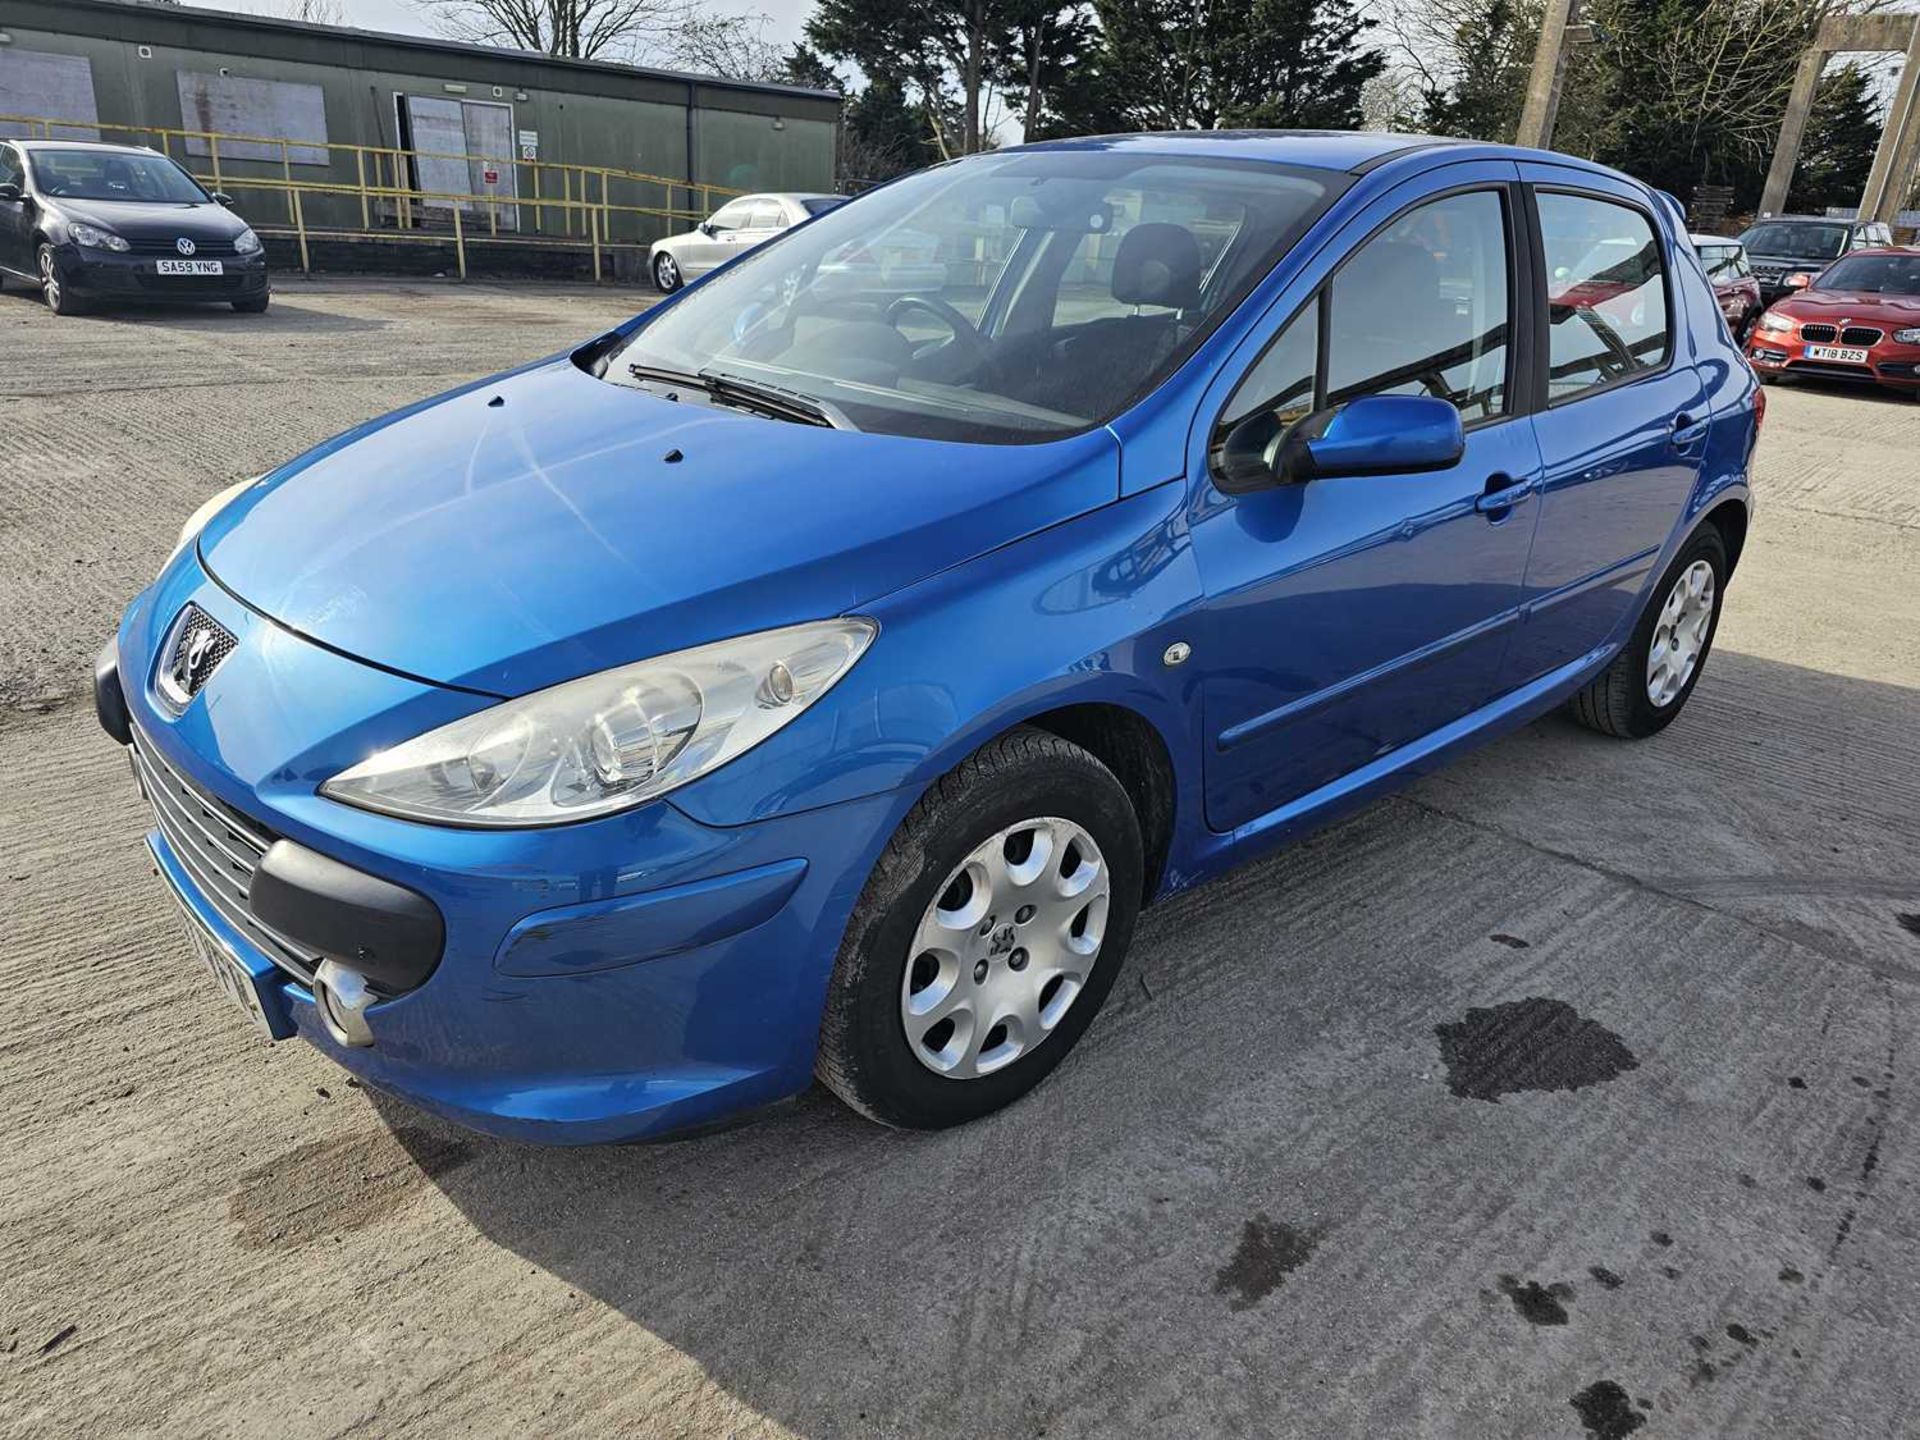 2007 Peugeot 307 X-line, 5 Speed, A/C (Reg. Docs. & Service History Available, Tested 07/24)